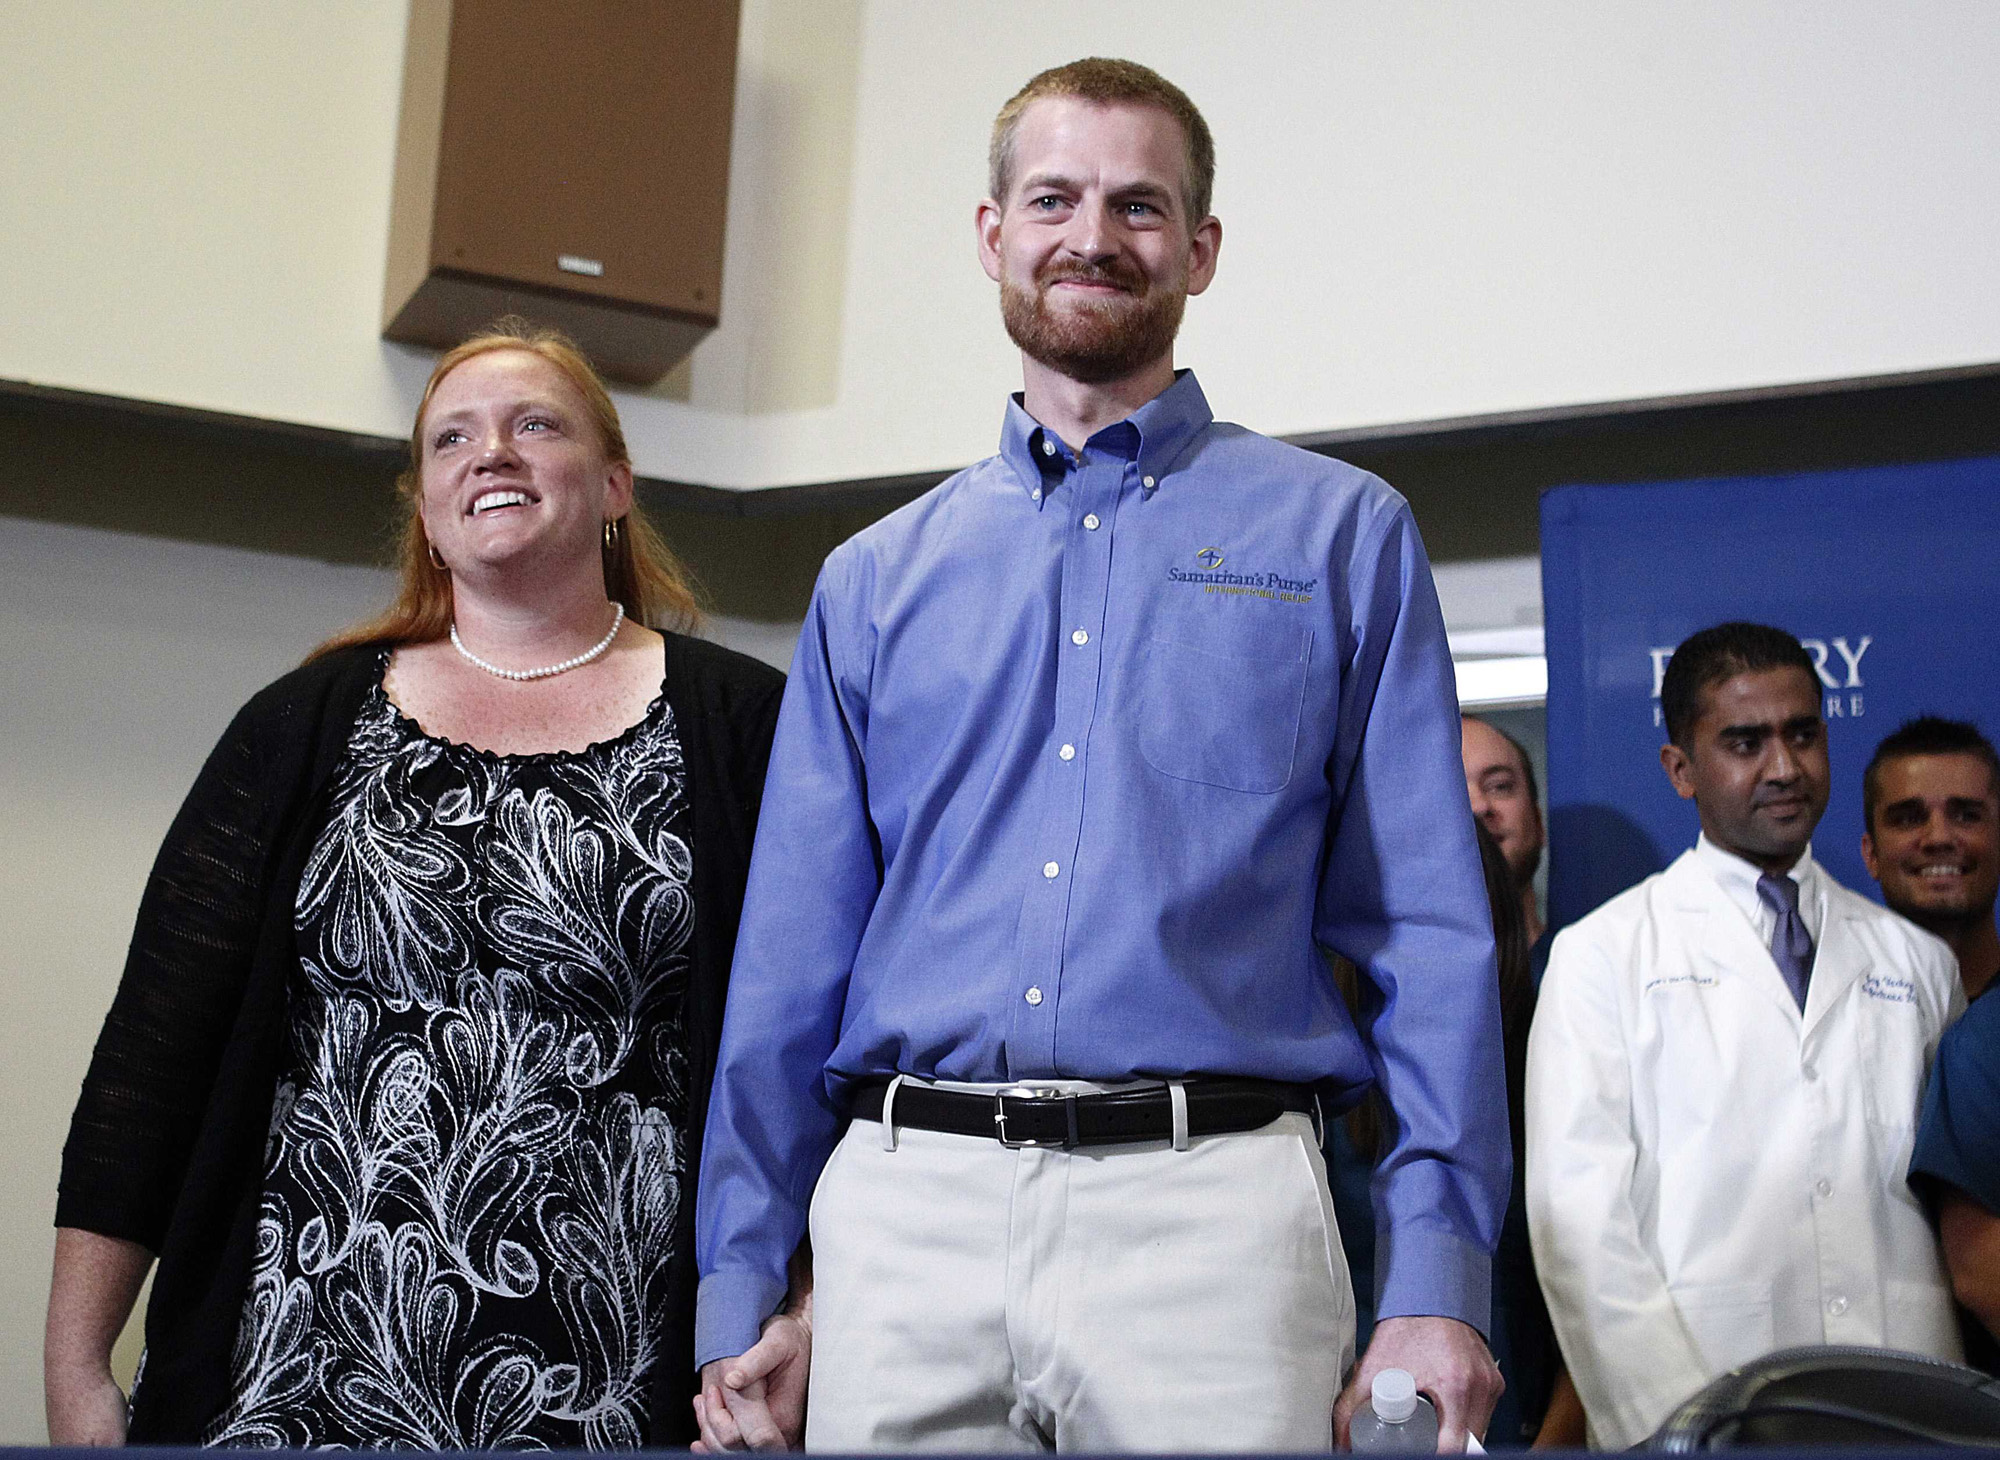 Kent Brantly, who contracted the deadly Ebola virus, stands with wife Amber during a press conference at Emory University Hospital in Atlanta, Aug. 21, 2014.